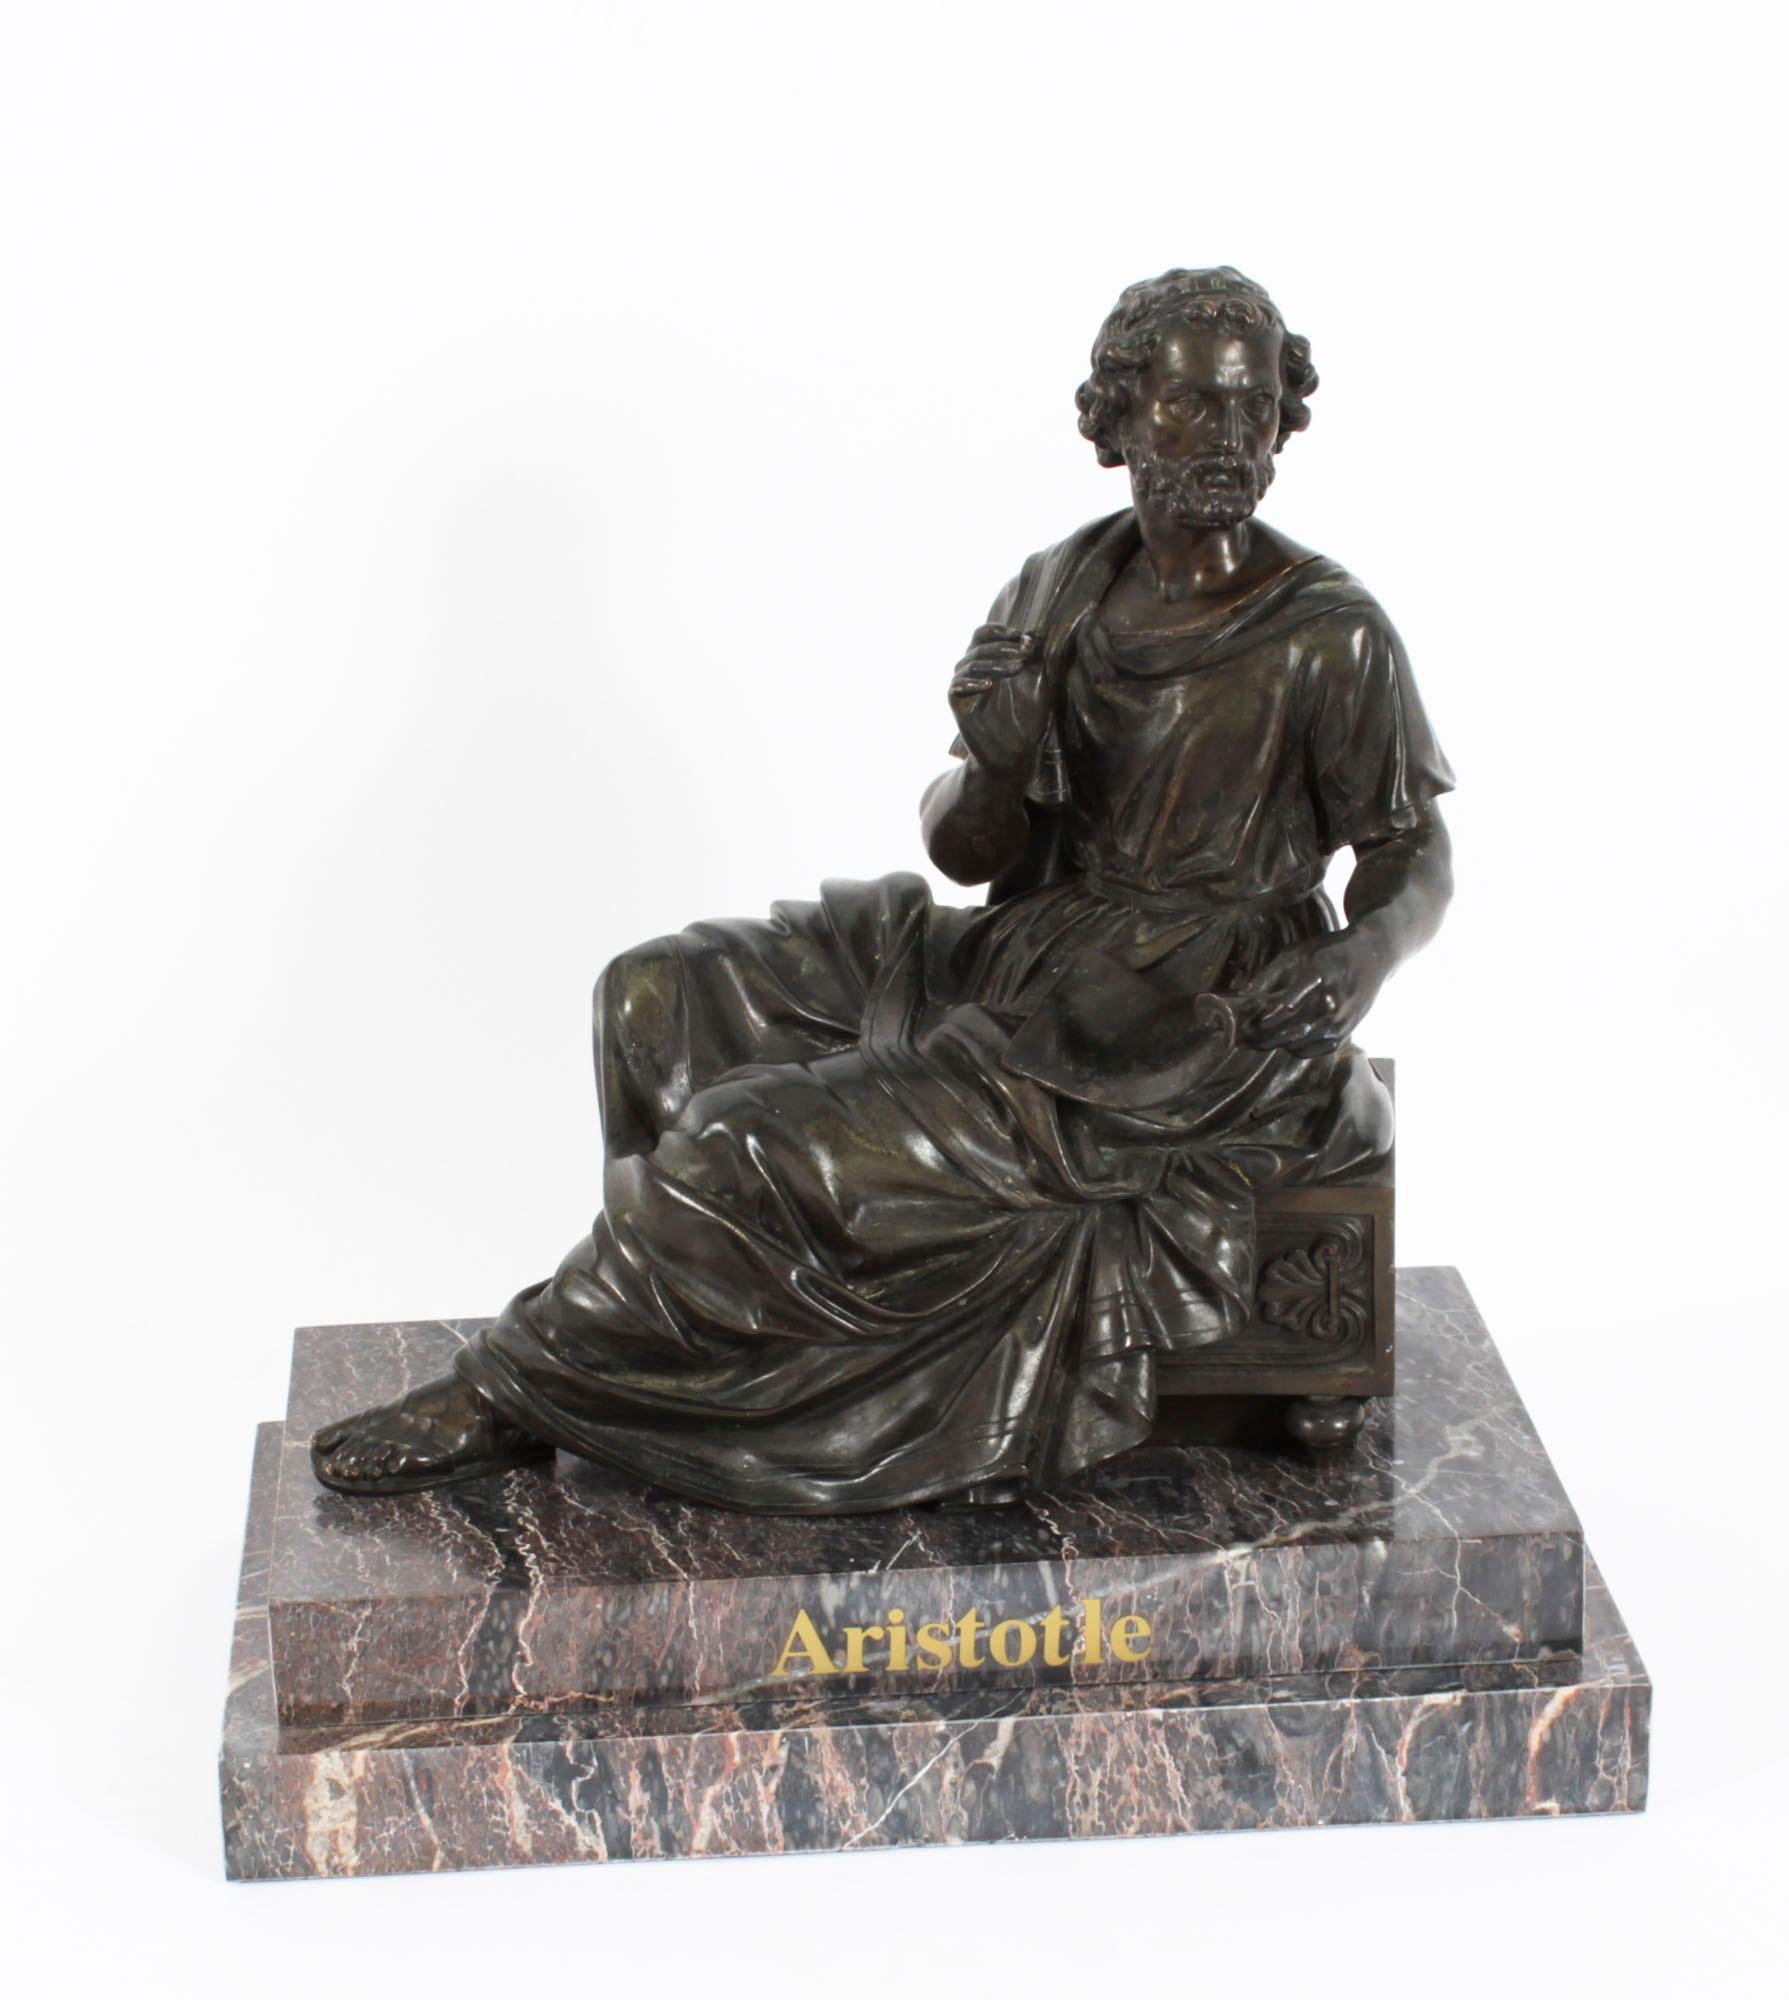 An elegant French Grand Tour bronze figure of Aristotle, dating from the early 19th century.
 
The robed bearded philosopher is holding a stylus and a scroll and turning ad sinistram, while seated on a pedestal ornamented with anthemion relief